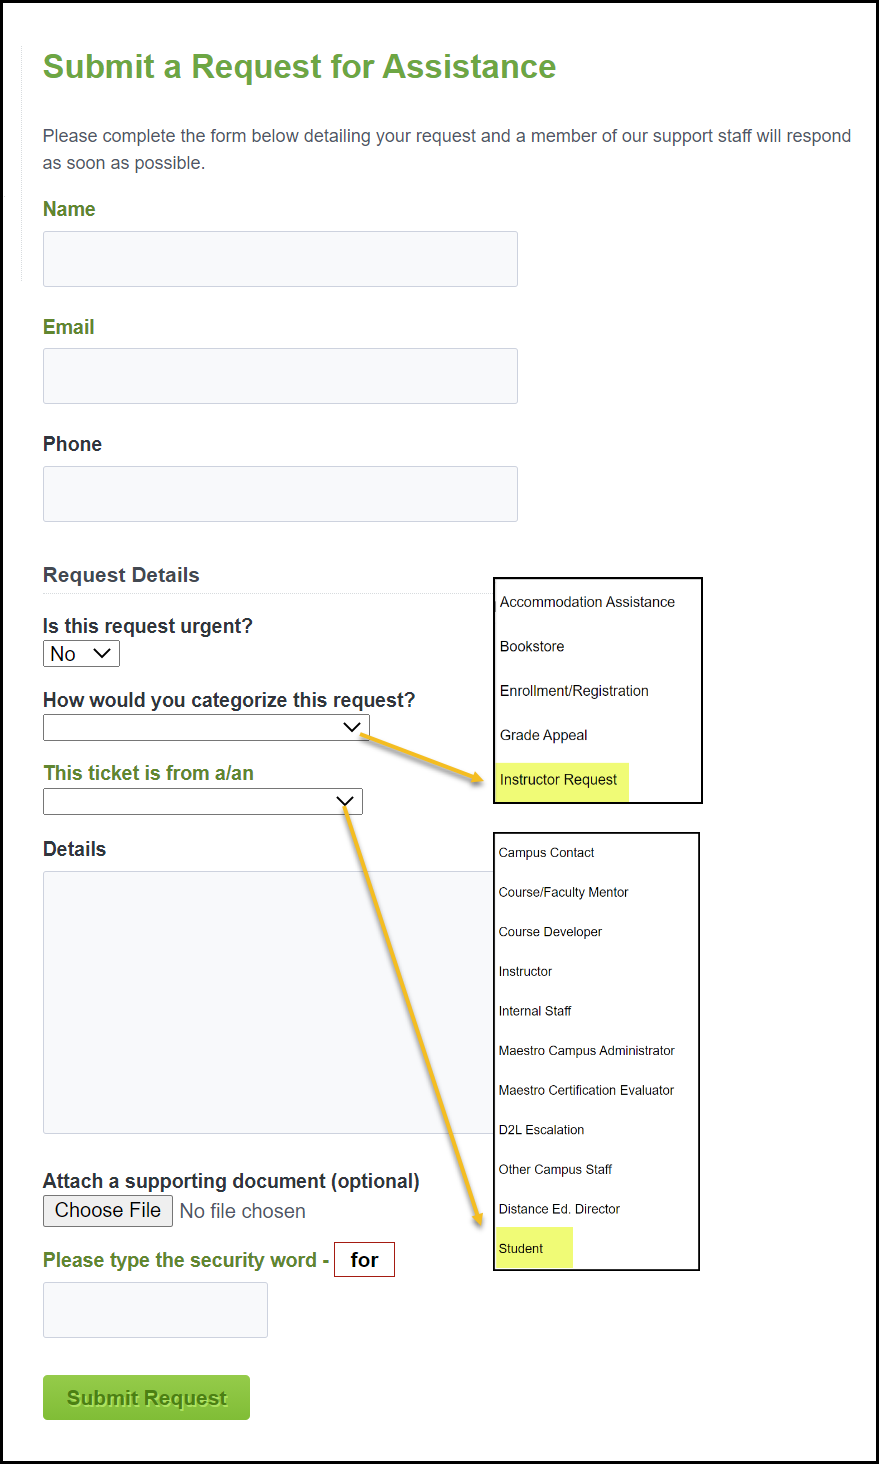 Sample help request form with text fields and dropdown menus exposed. Instructor Request and Student highlighted